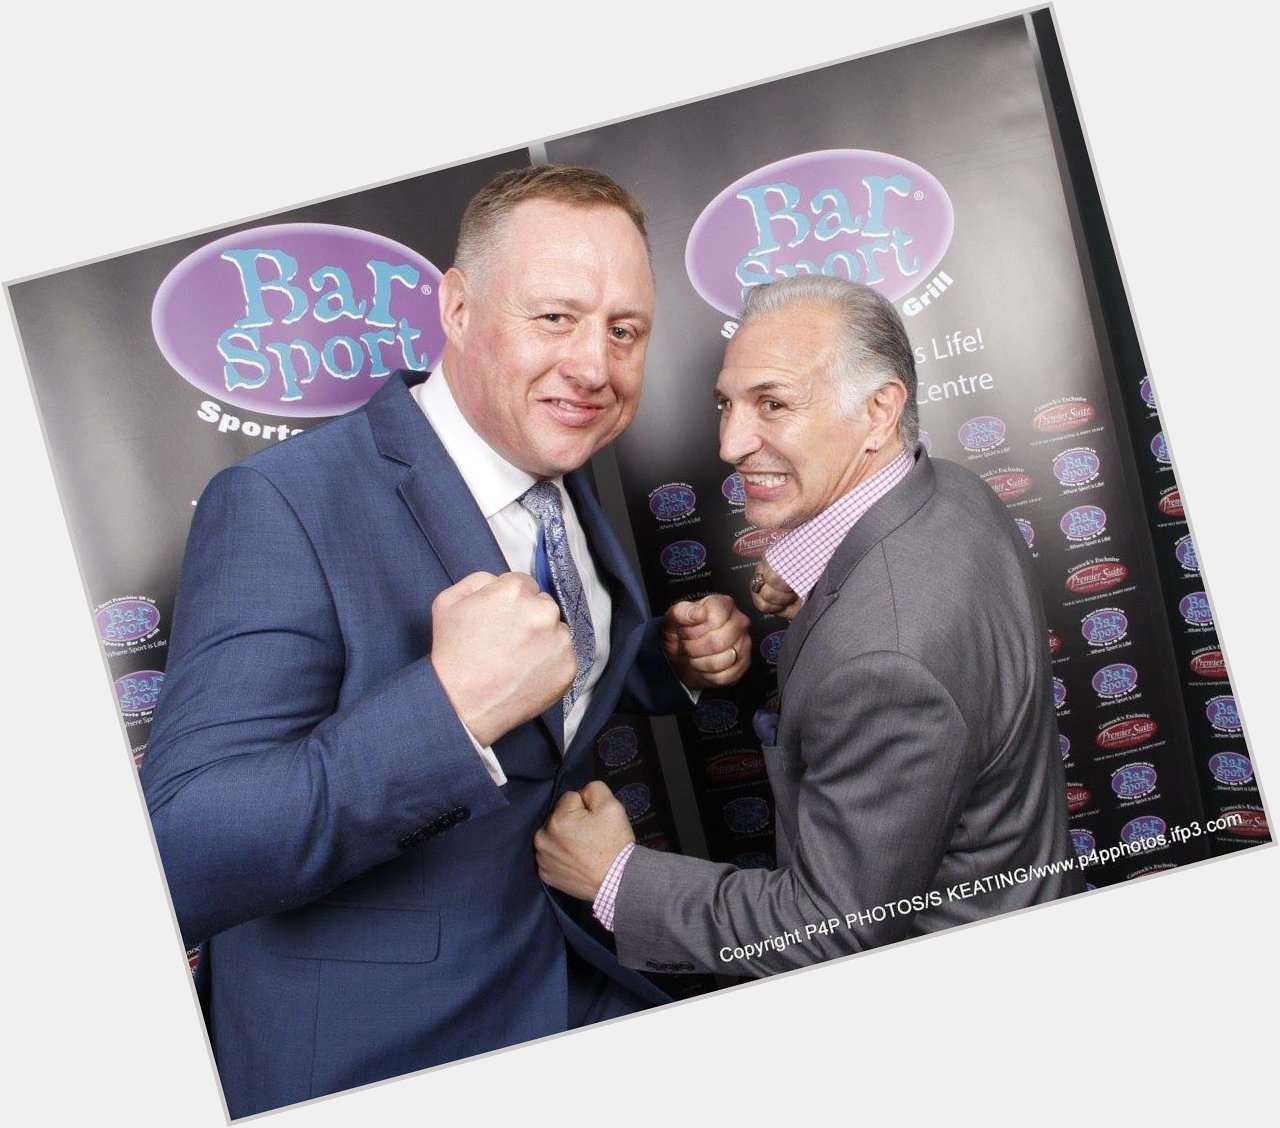 A big Happy Birthday to the Legendary Ray \Boom Boom\ Mancini today!
See you in September Champ! 